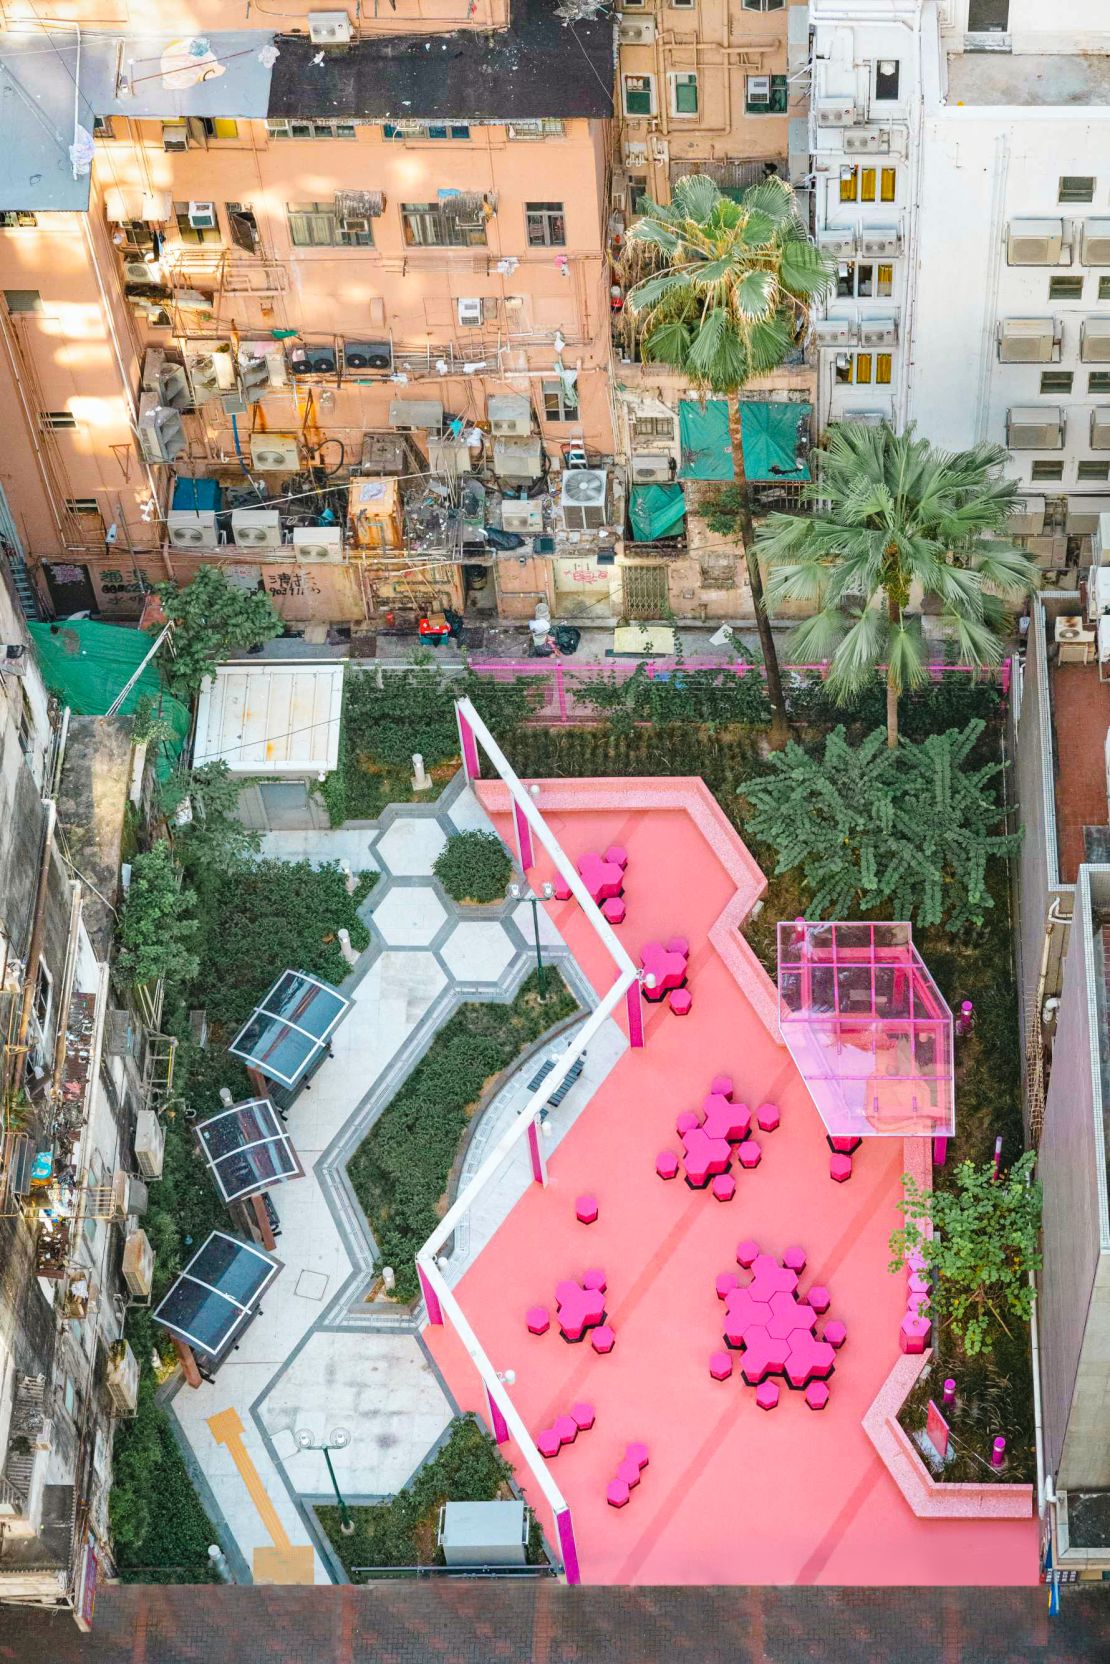 Hong Kong's colorful new 'pocket parks' are revitalizing public spaces